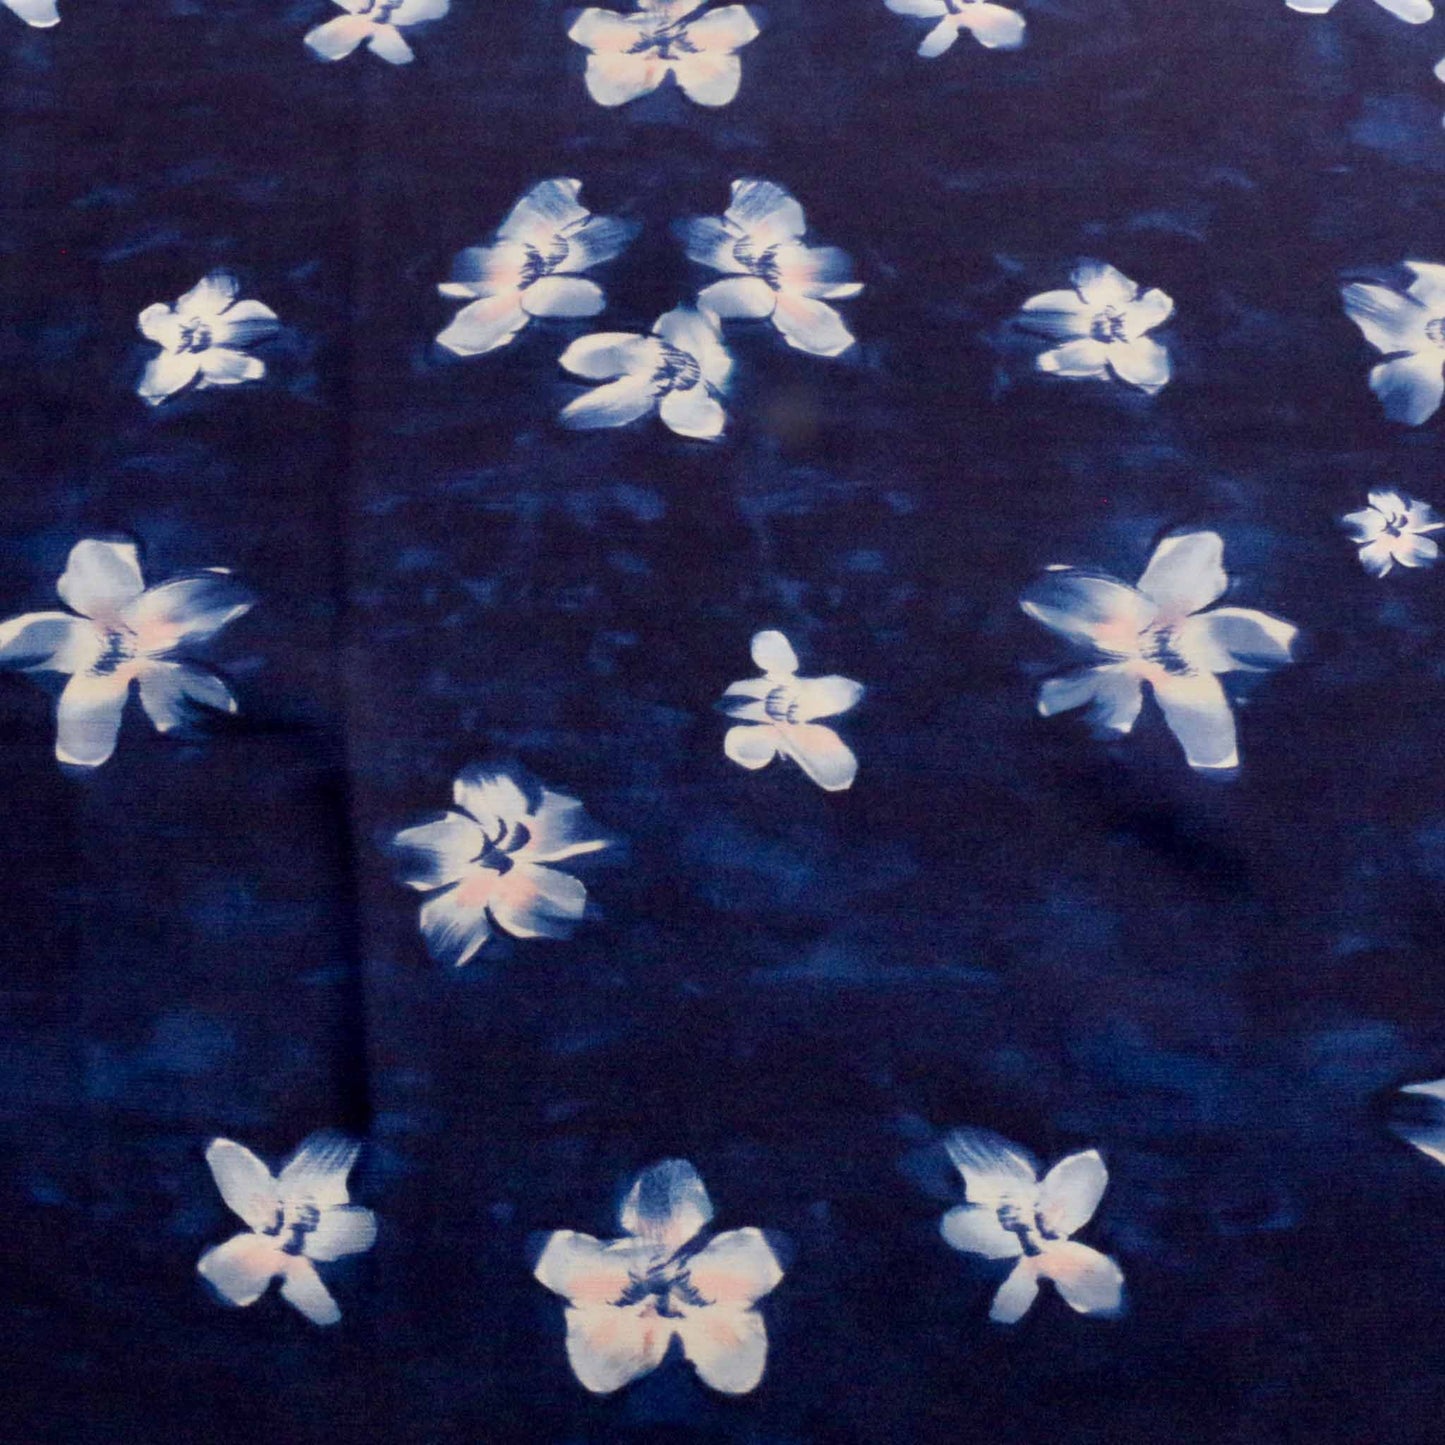 floral crepe back satin dressmaking fabric in navy blue with white floral print